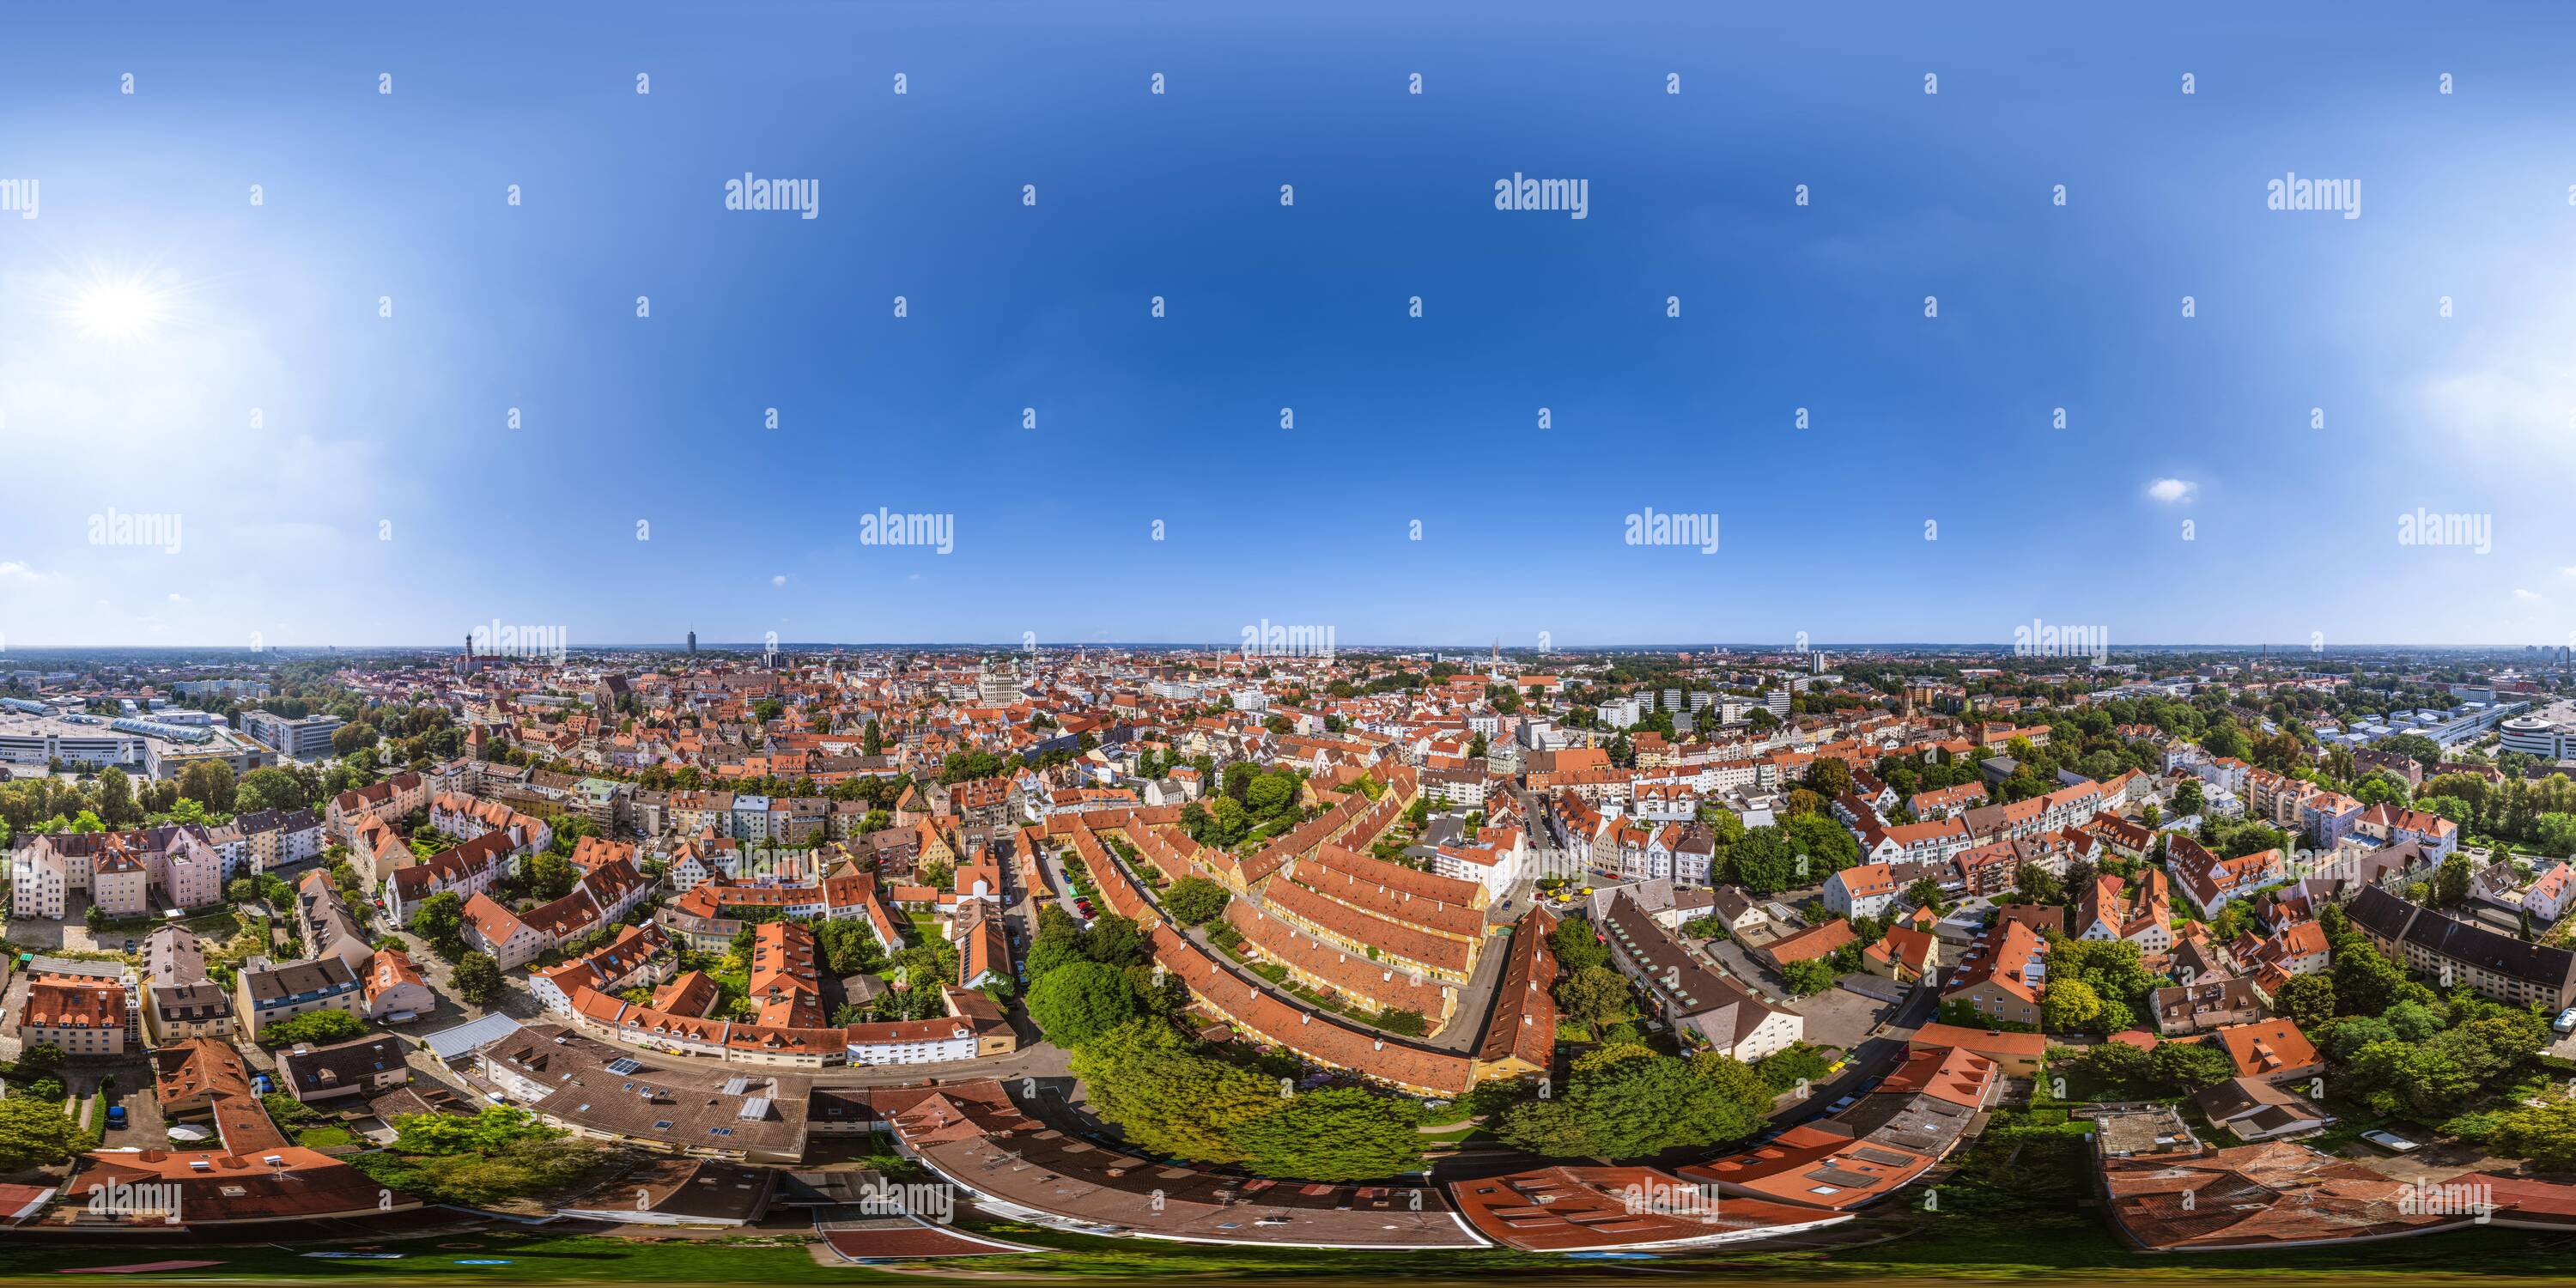 360 degree panoramic view of Augsburg - an interactive flight over the city near the Fuggerei